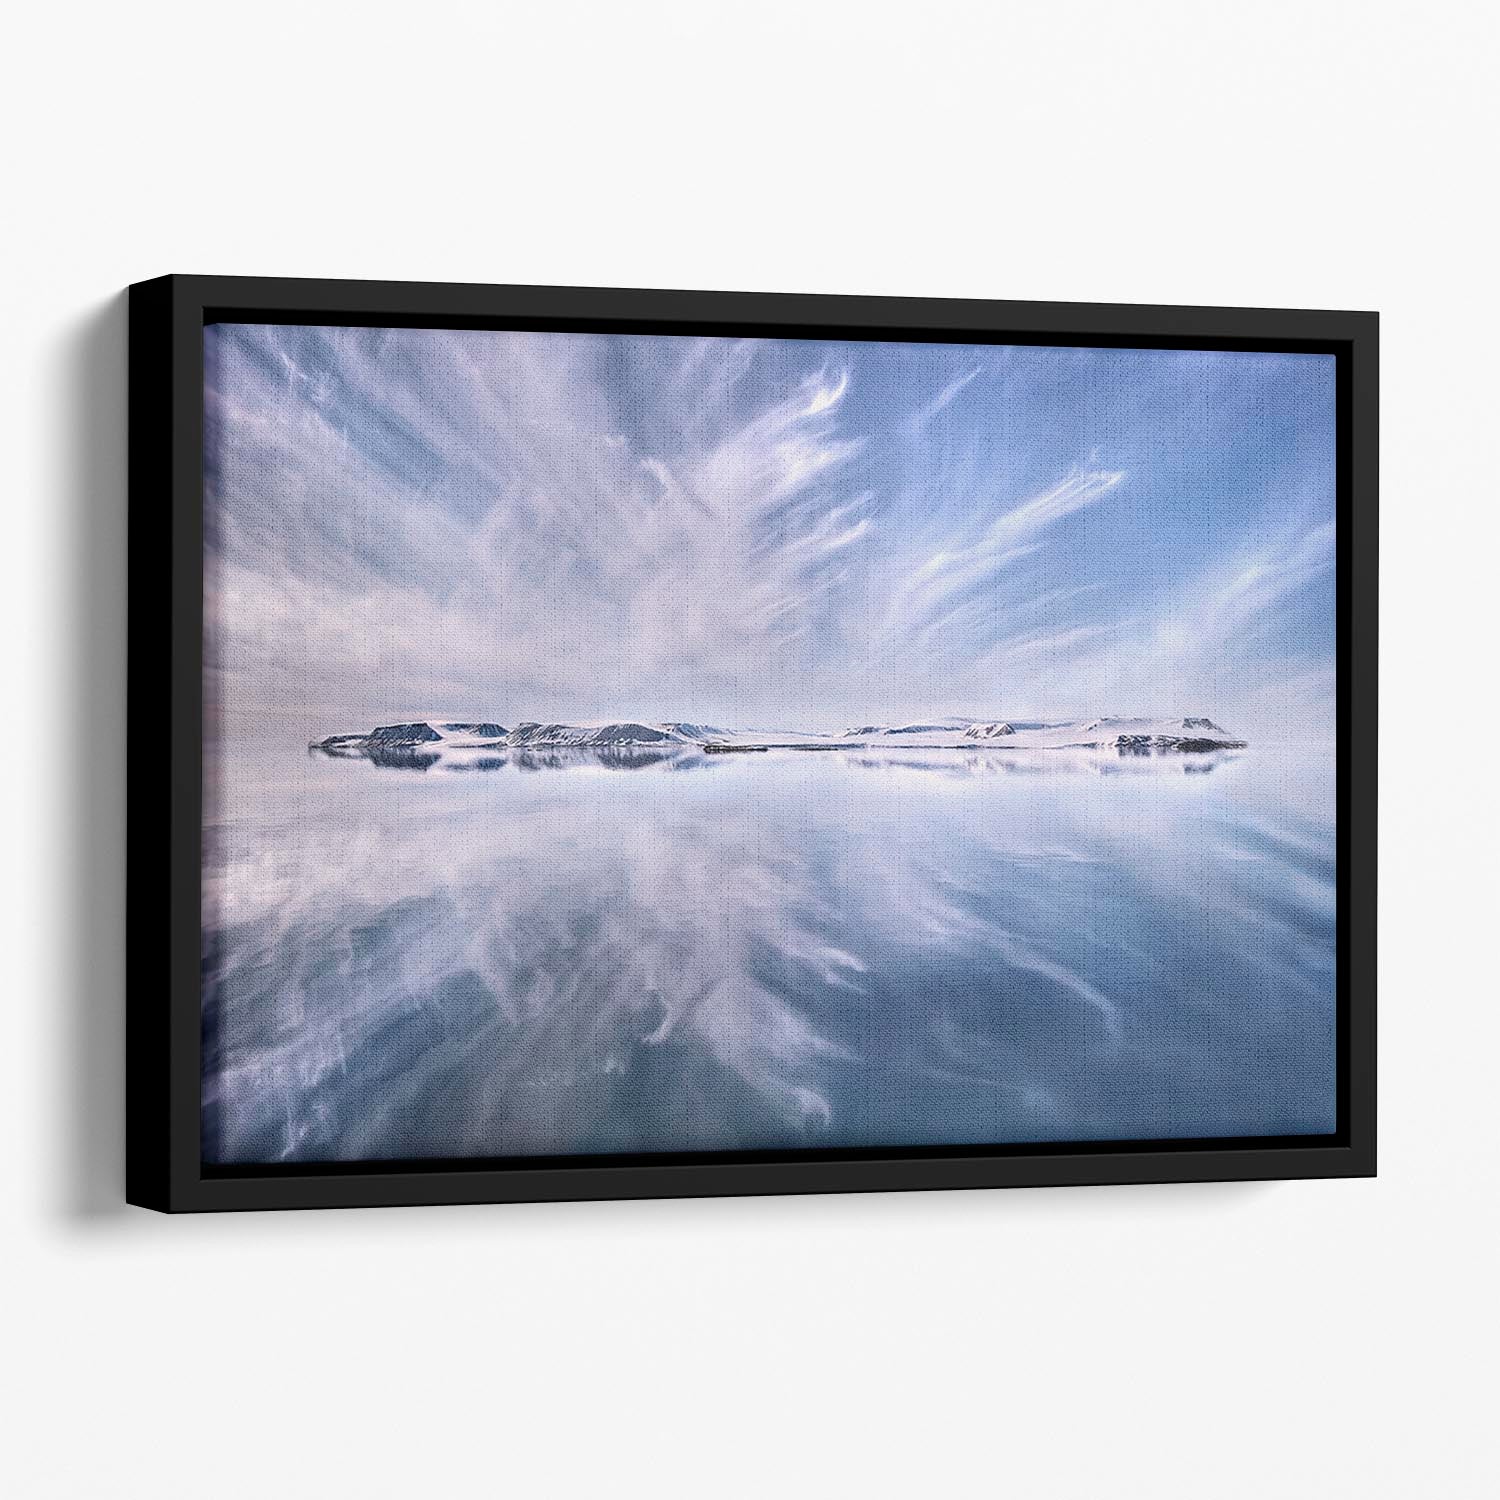 Only A Beautiful Artic Day Floating Framed Canvas - Canvas Art Rocks - 1